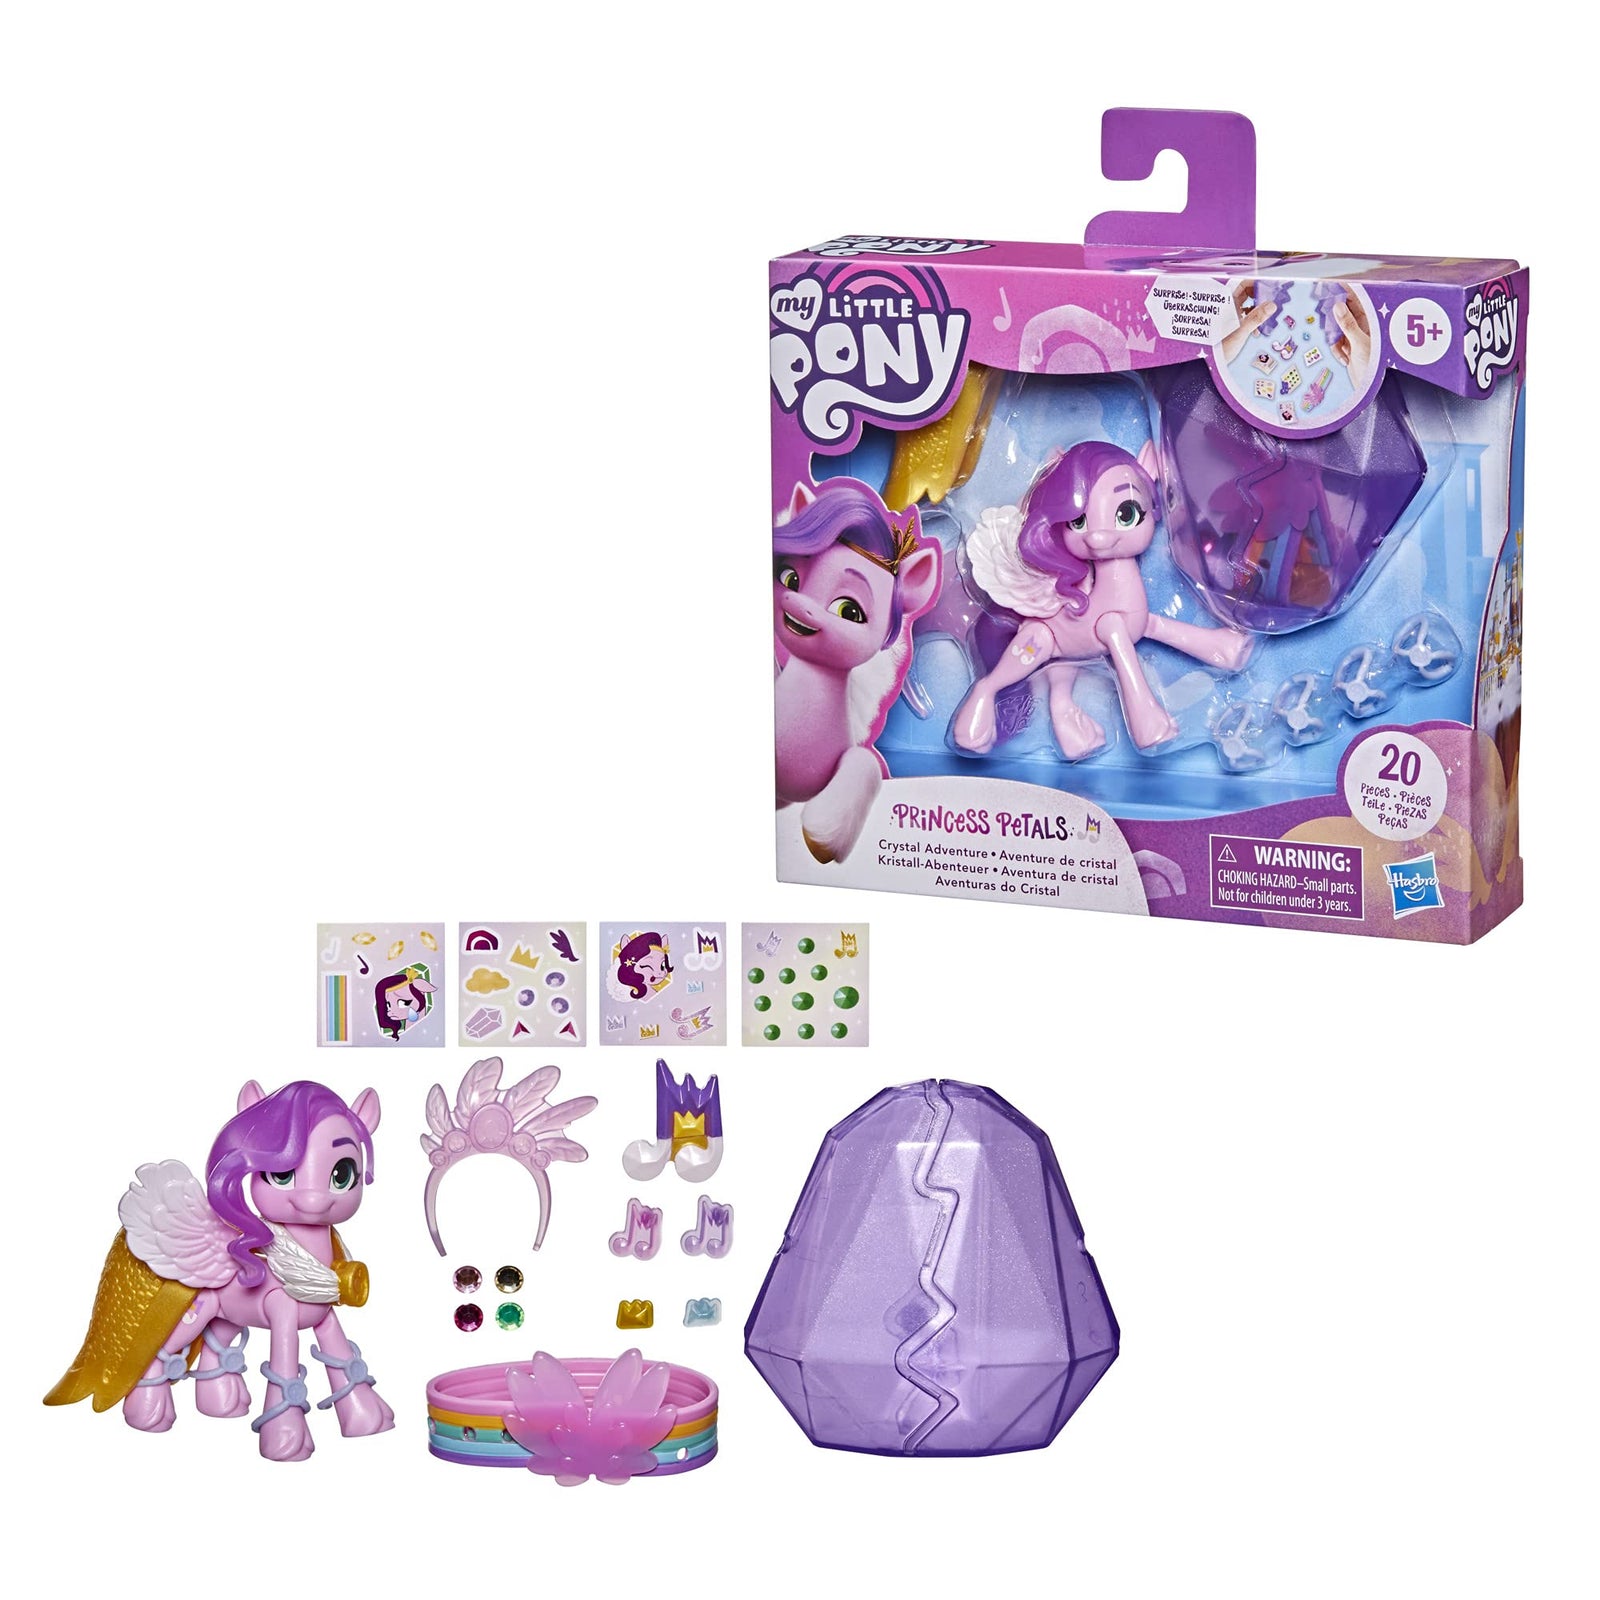 My Little Pony: A New Generation Movie Crystal Adventure Princess Pipp Petals - 3-Inch Pink Pony Toy, Surprise Accessories, Friendship Bracelet